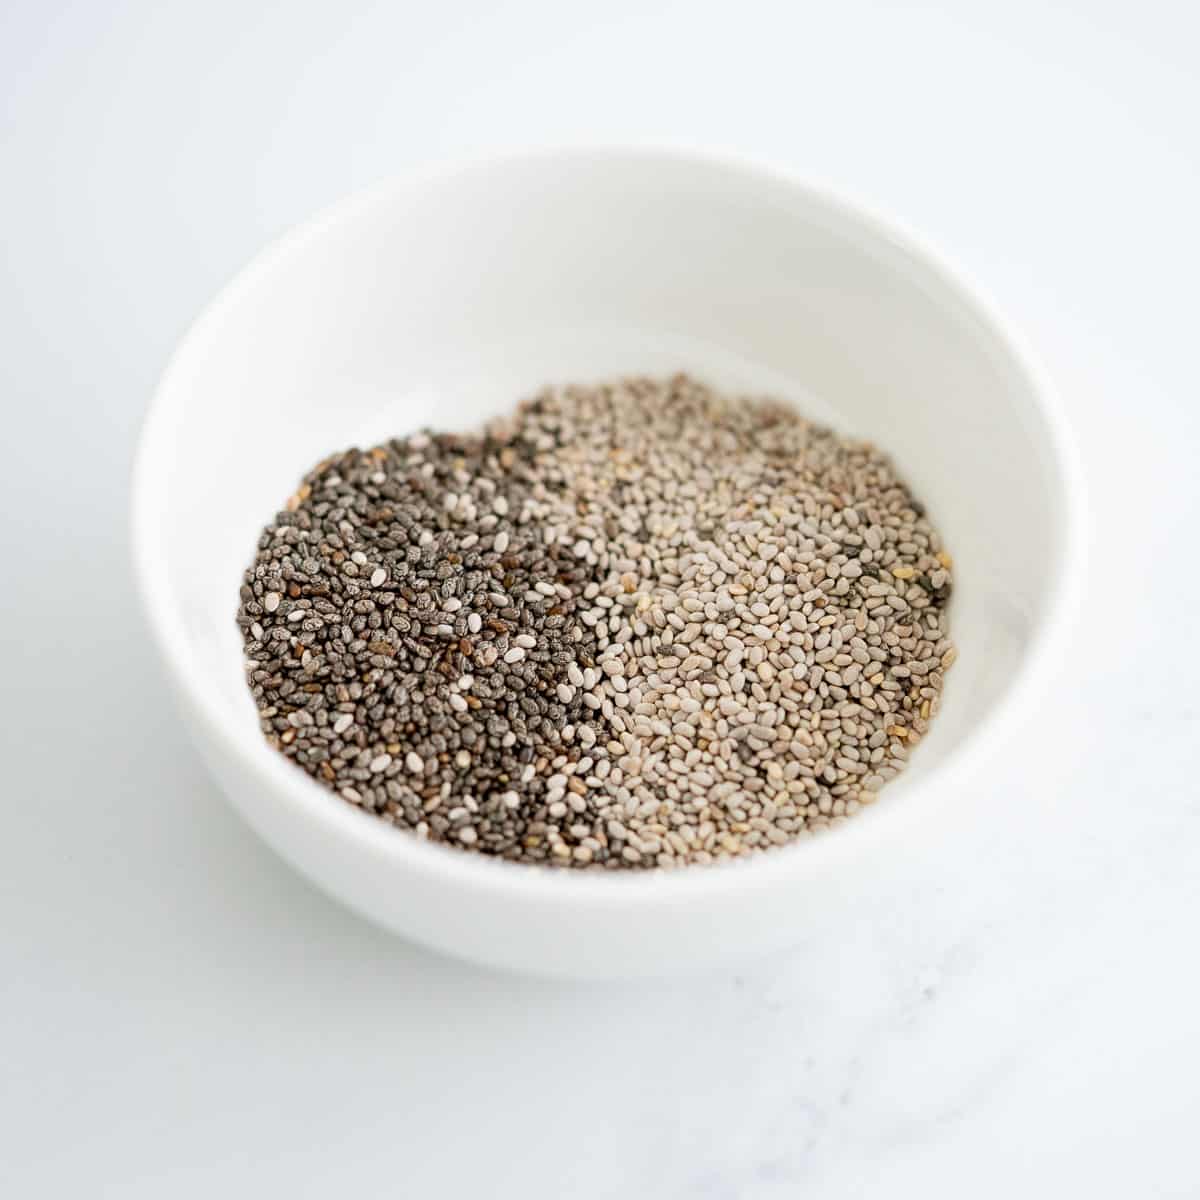 Small white bowl half filled with white chai seeds and half filled with black chia seeds.